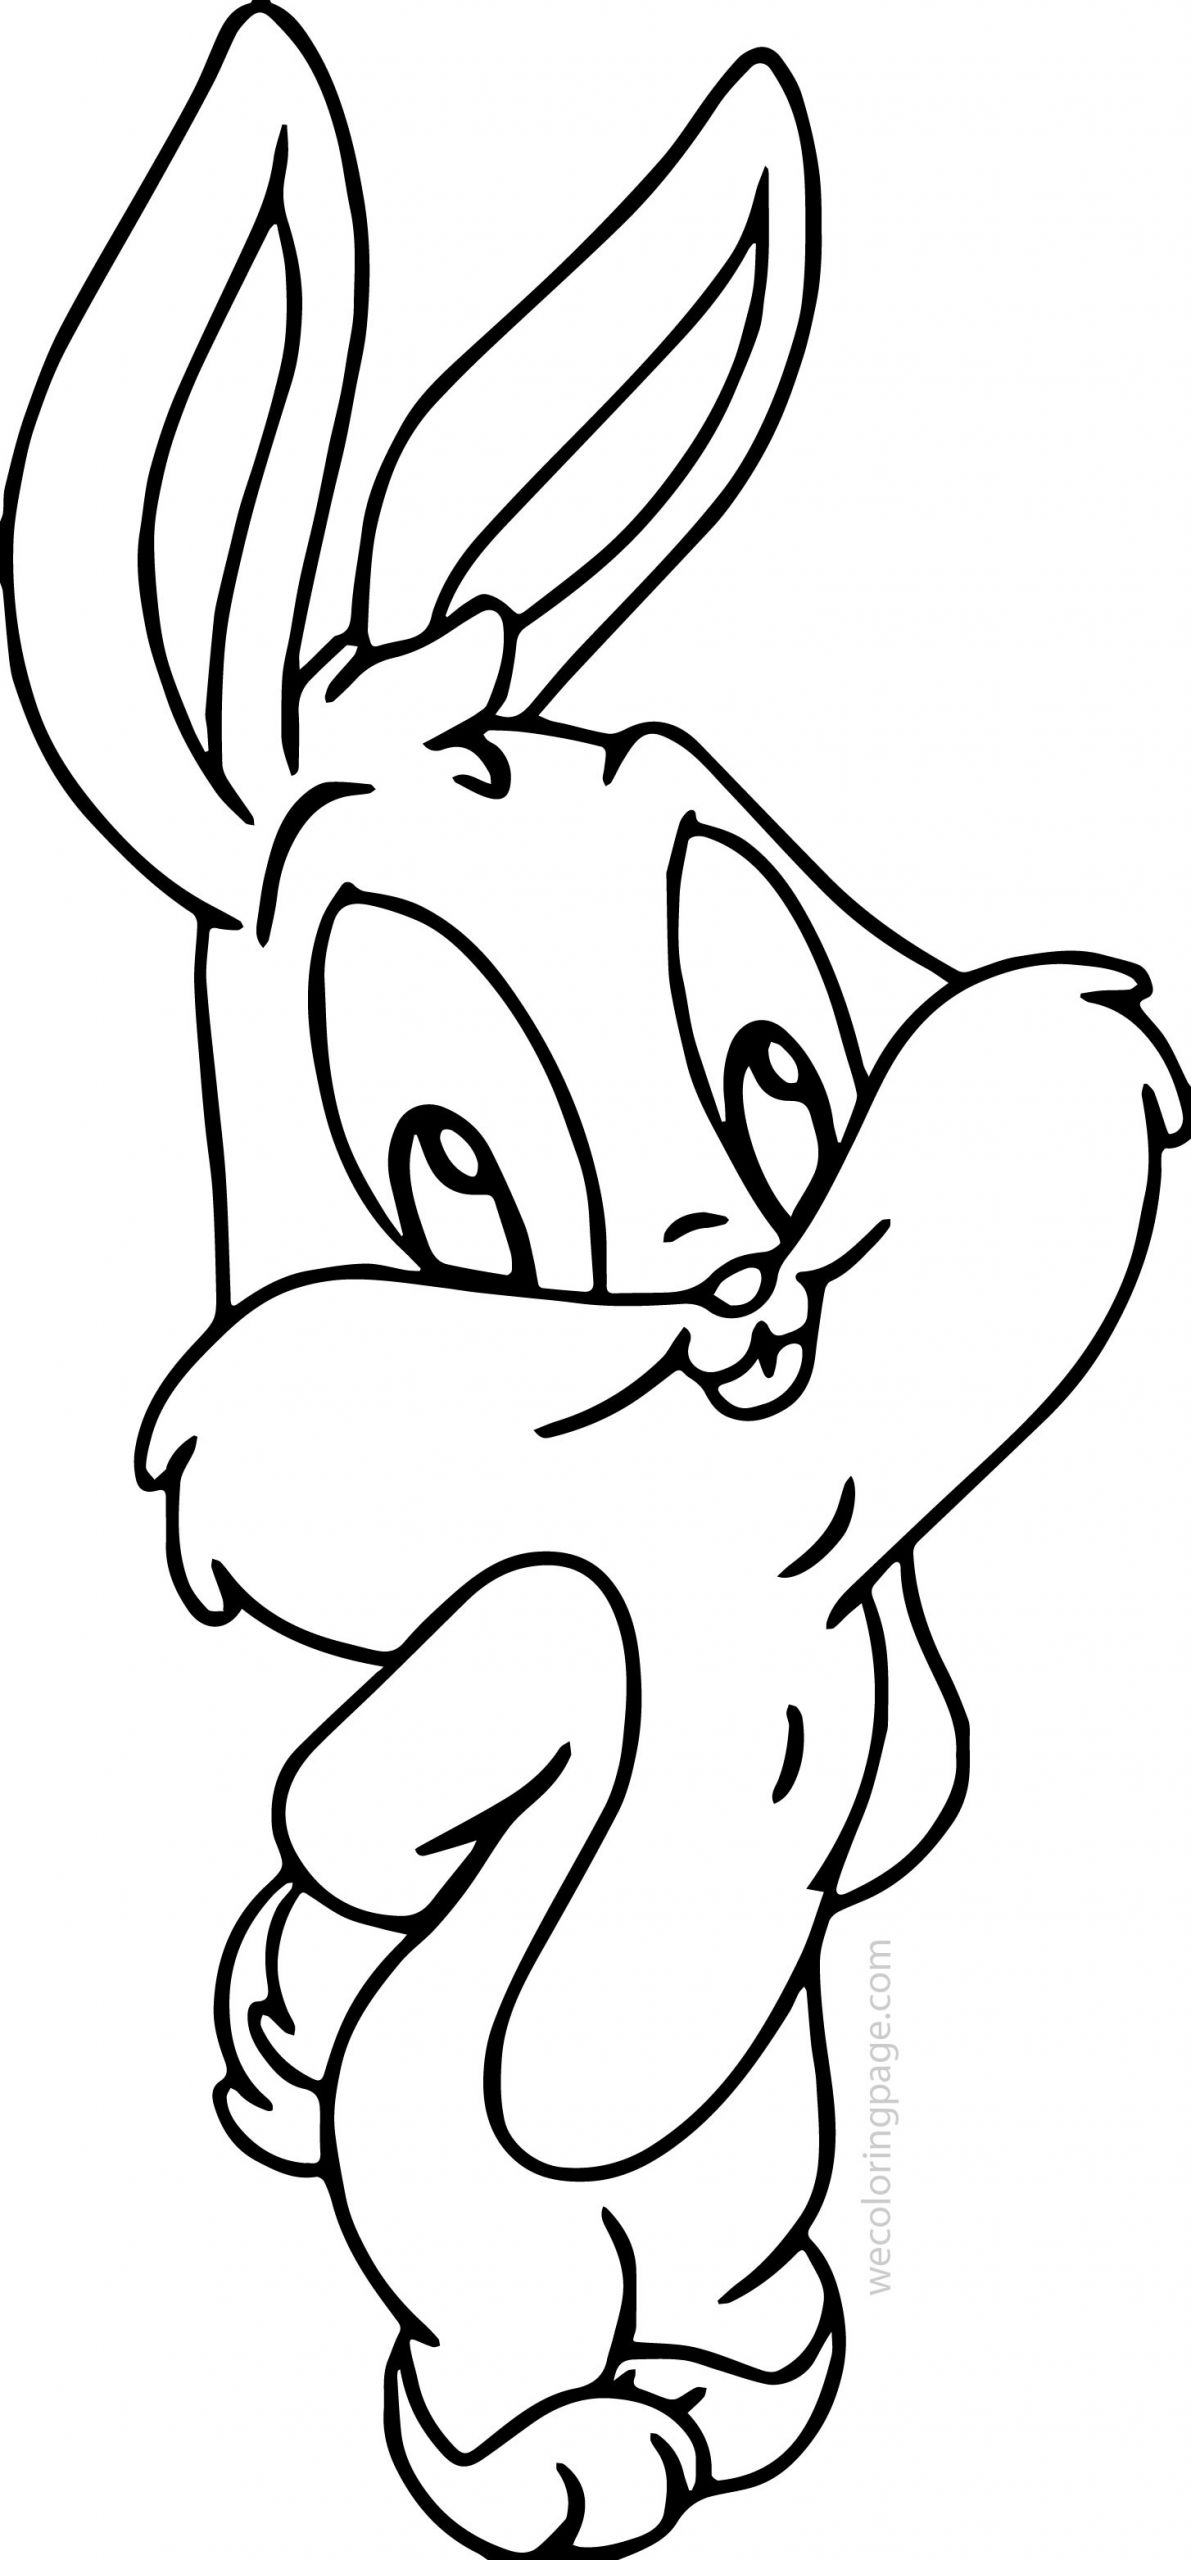 Coloring Pages Of Baby Bunnies
 Cute Baby Bugs Bunny Coloring Page